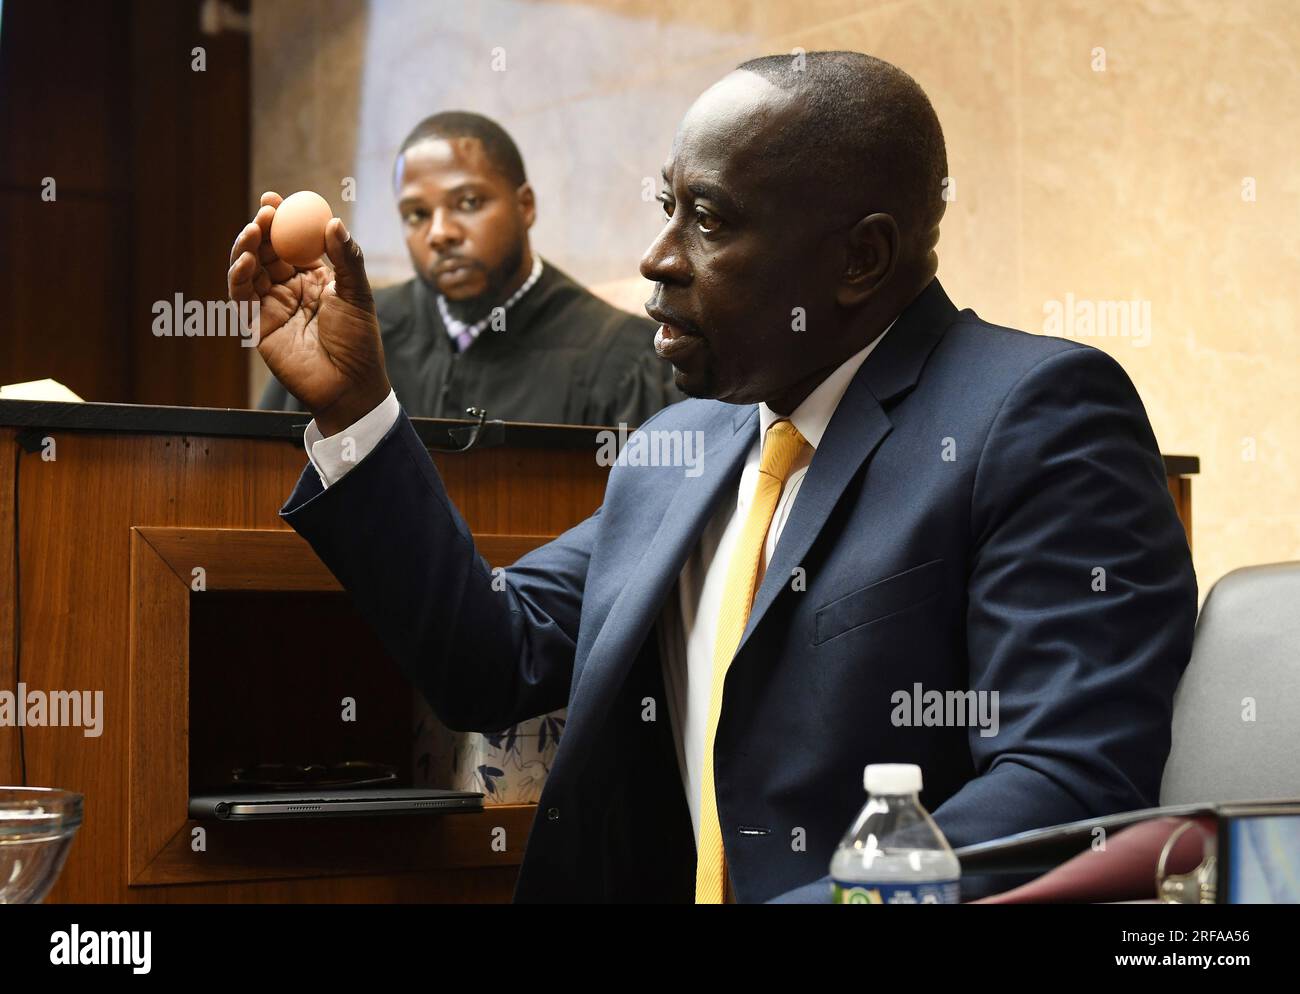 Dr. Colin King, uses an egg to demonstrate the softness of brain tissue in  Ethan Crumbley's brain during testimony in Ethan Crumbley's hearing at  Oakland County Circuit Court, Tuesday, Aug. 1, 2023